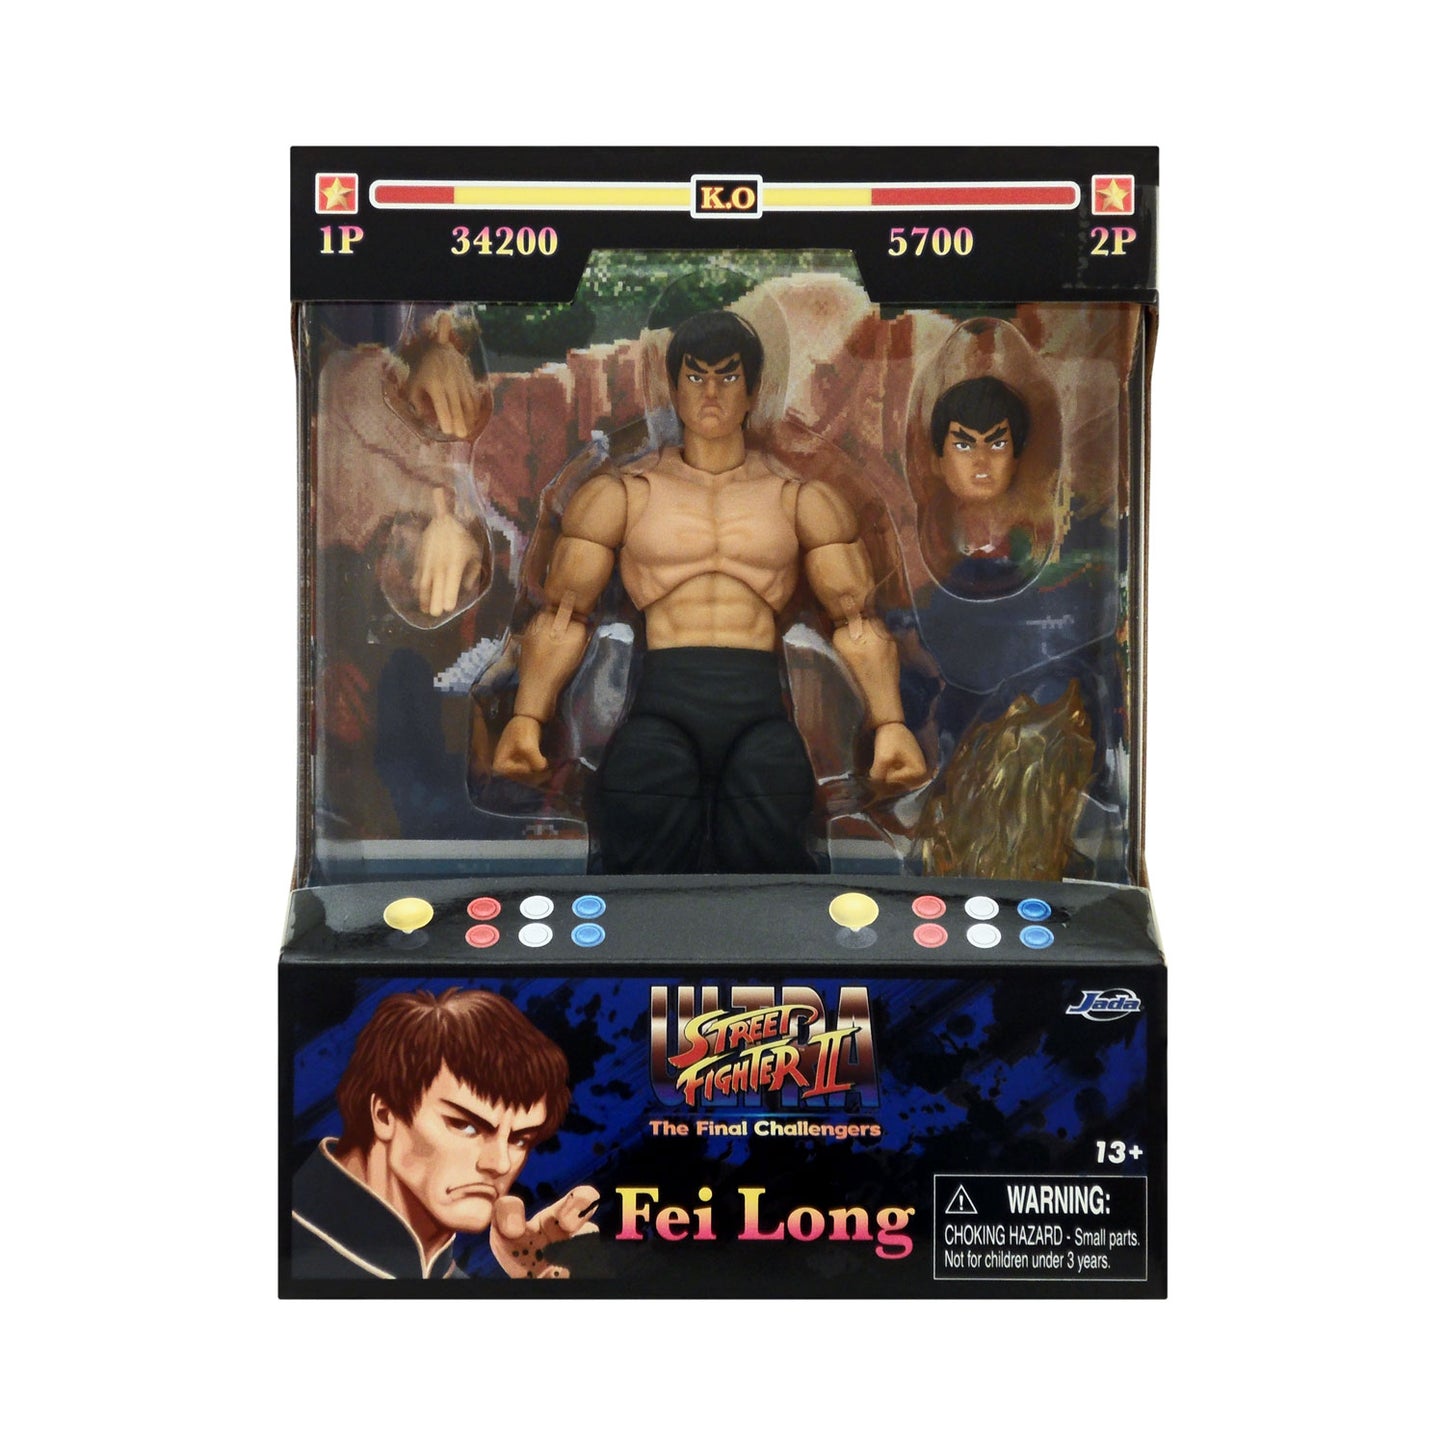 Fei Long 6-Inch Action Figure from Street Fighter II: The Final Challengers